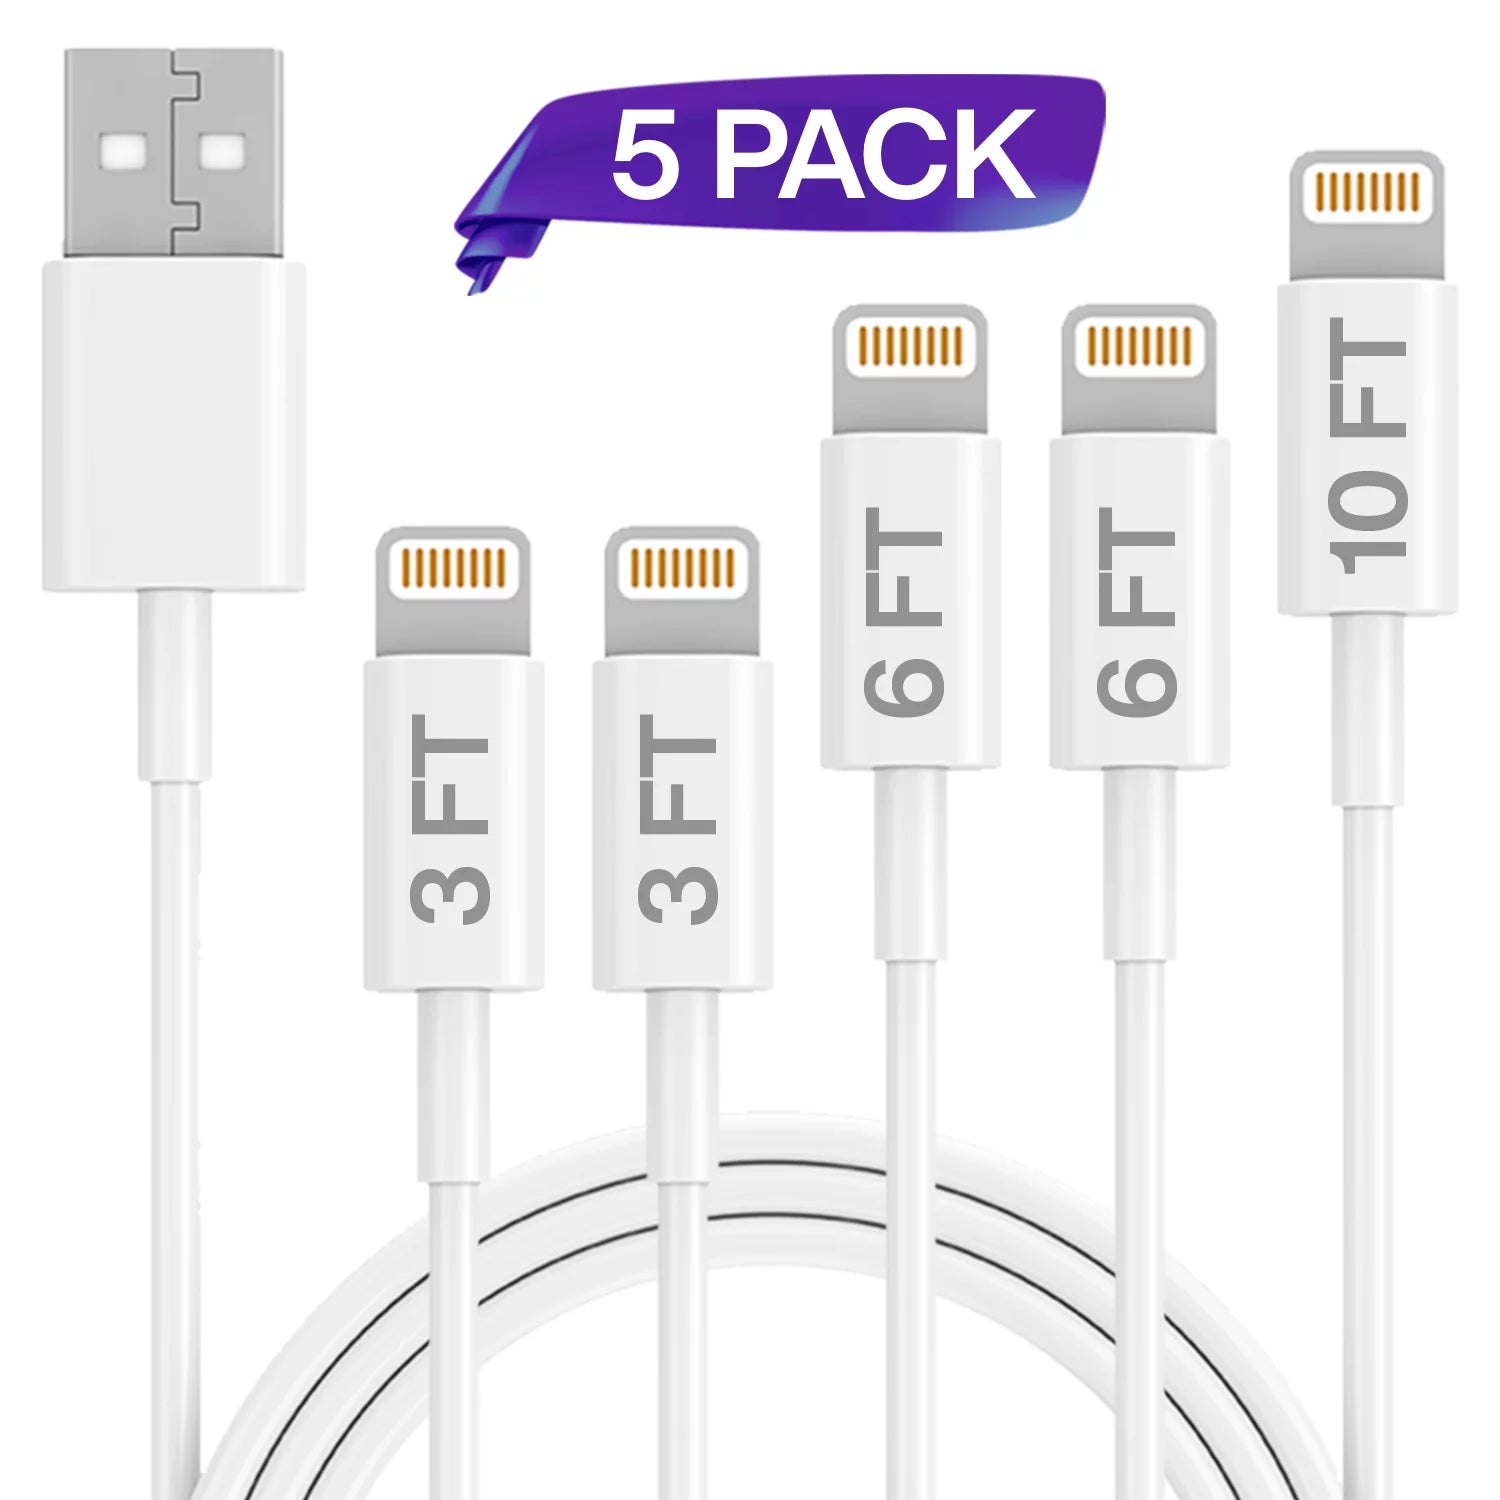 iPhone Charger Lightning Cable - ,5 Pack (2 x 3FT, 2 x 6FT, 10FT) USB Cable, For Apple iPhone xs, xs Max, xr, x,8,8Plus,7,7Plus,6S,6SPlus, iPad Air, Mini, iPod Touch, Case Original Size